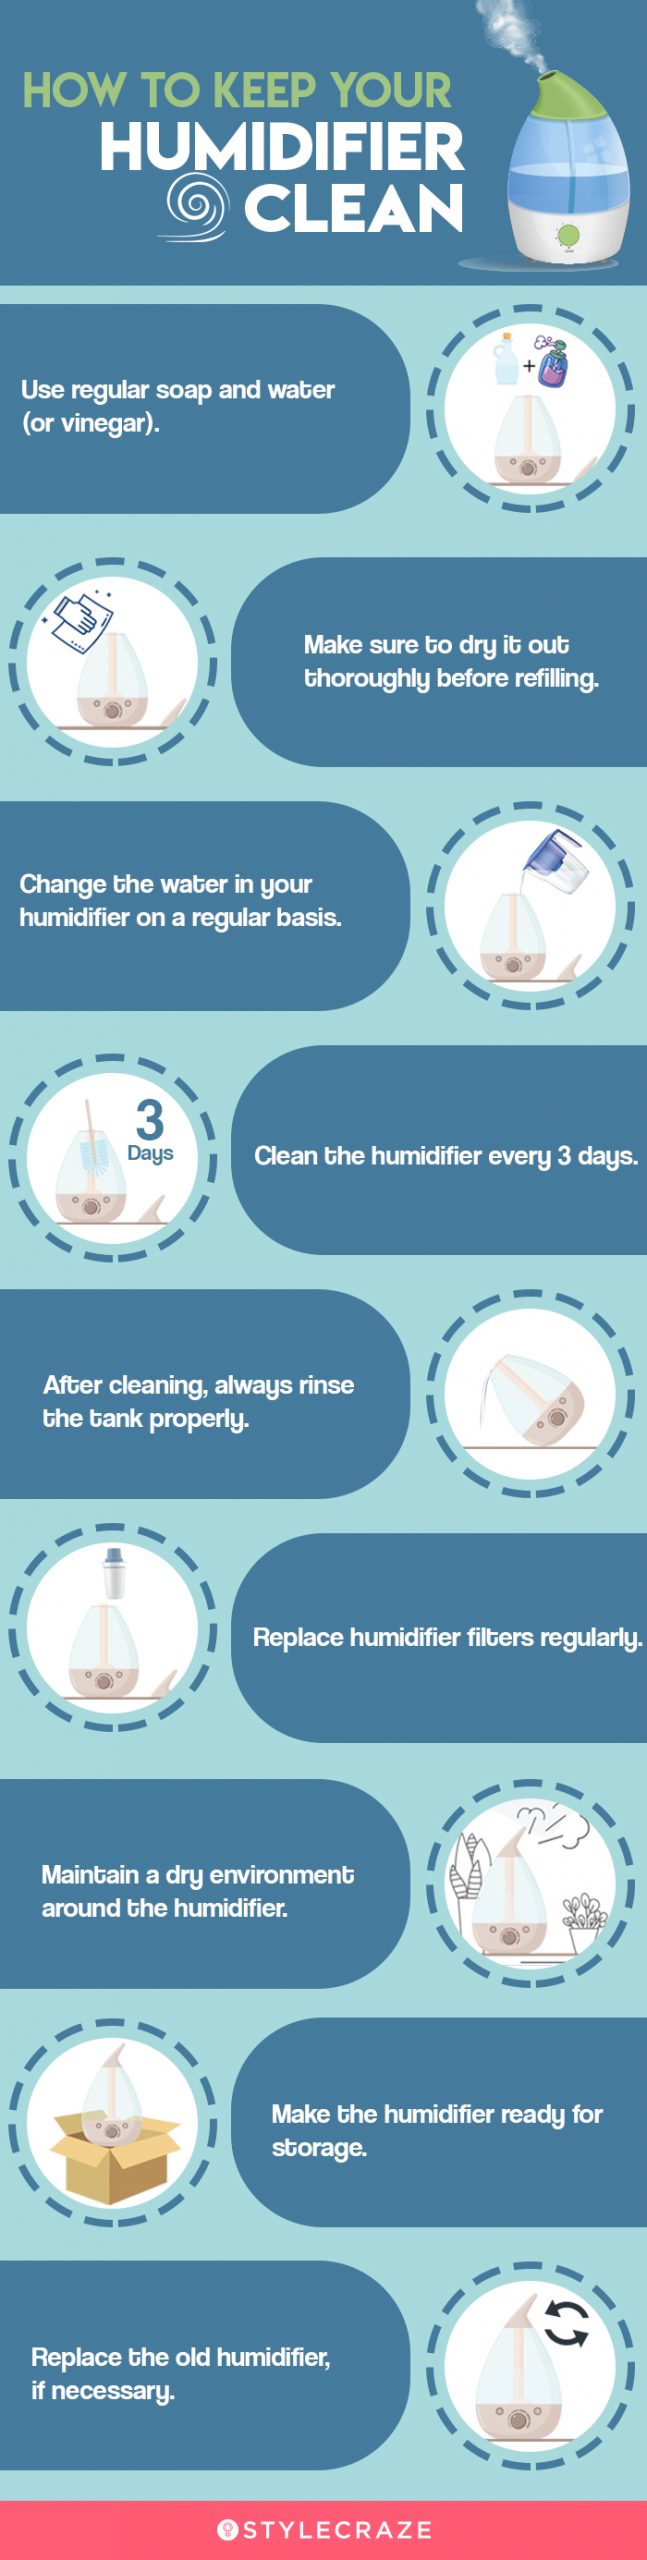 how to keep your humidifier clean (infographic)